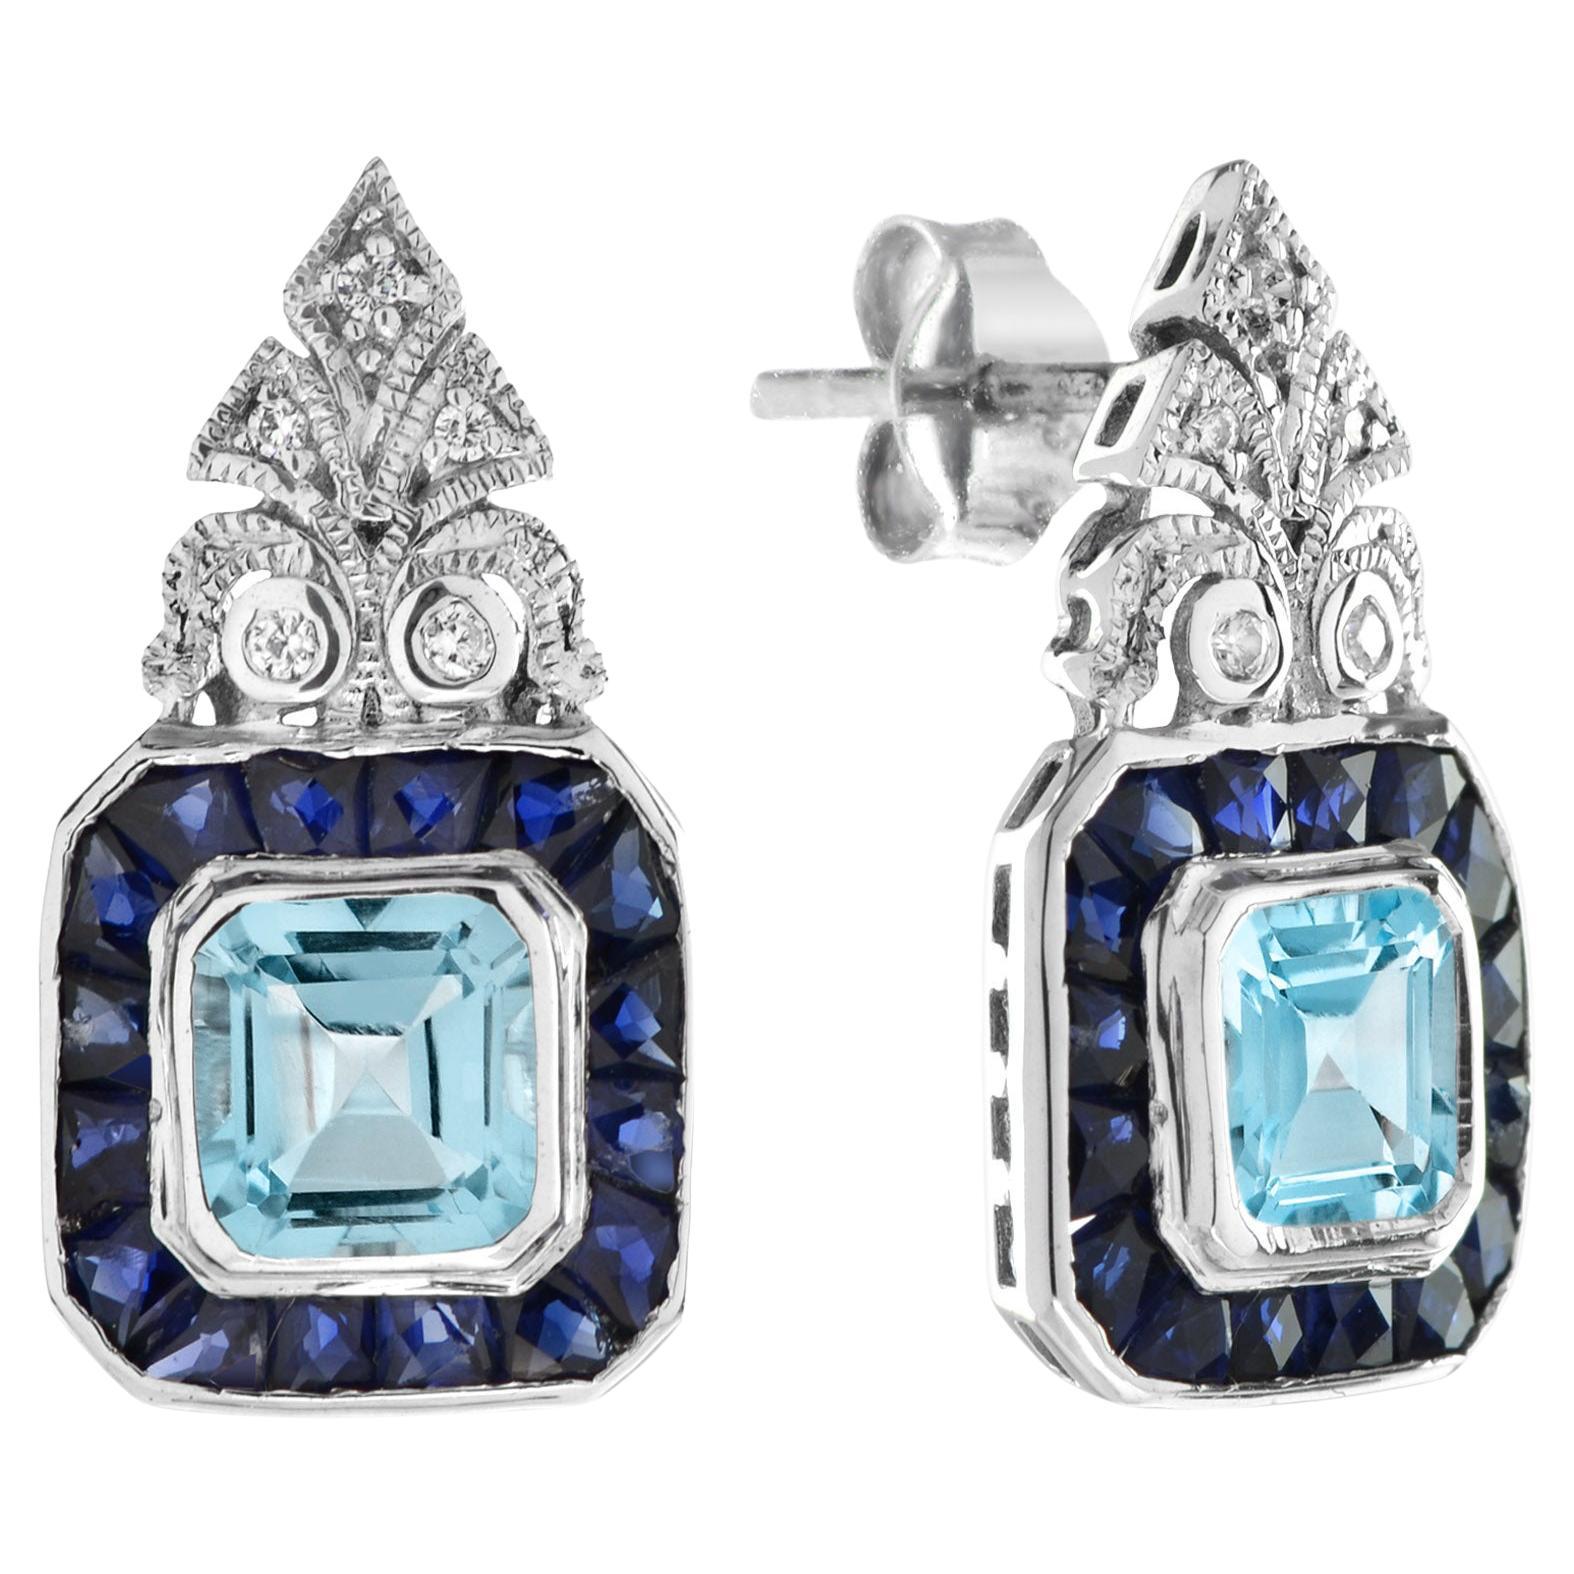 Emerald Cut Aquamarine with Sapphire and Diamond Drop Earrings in 18K Gold